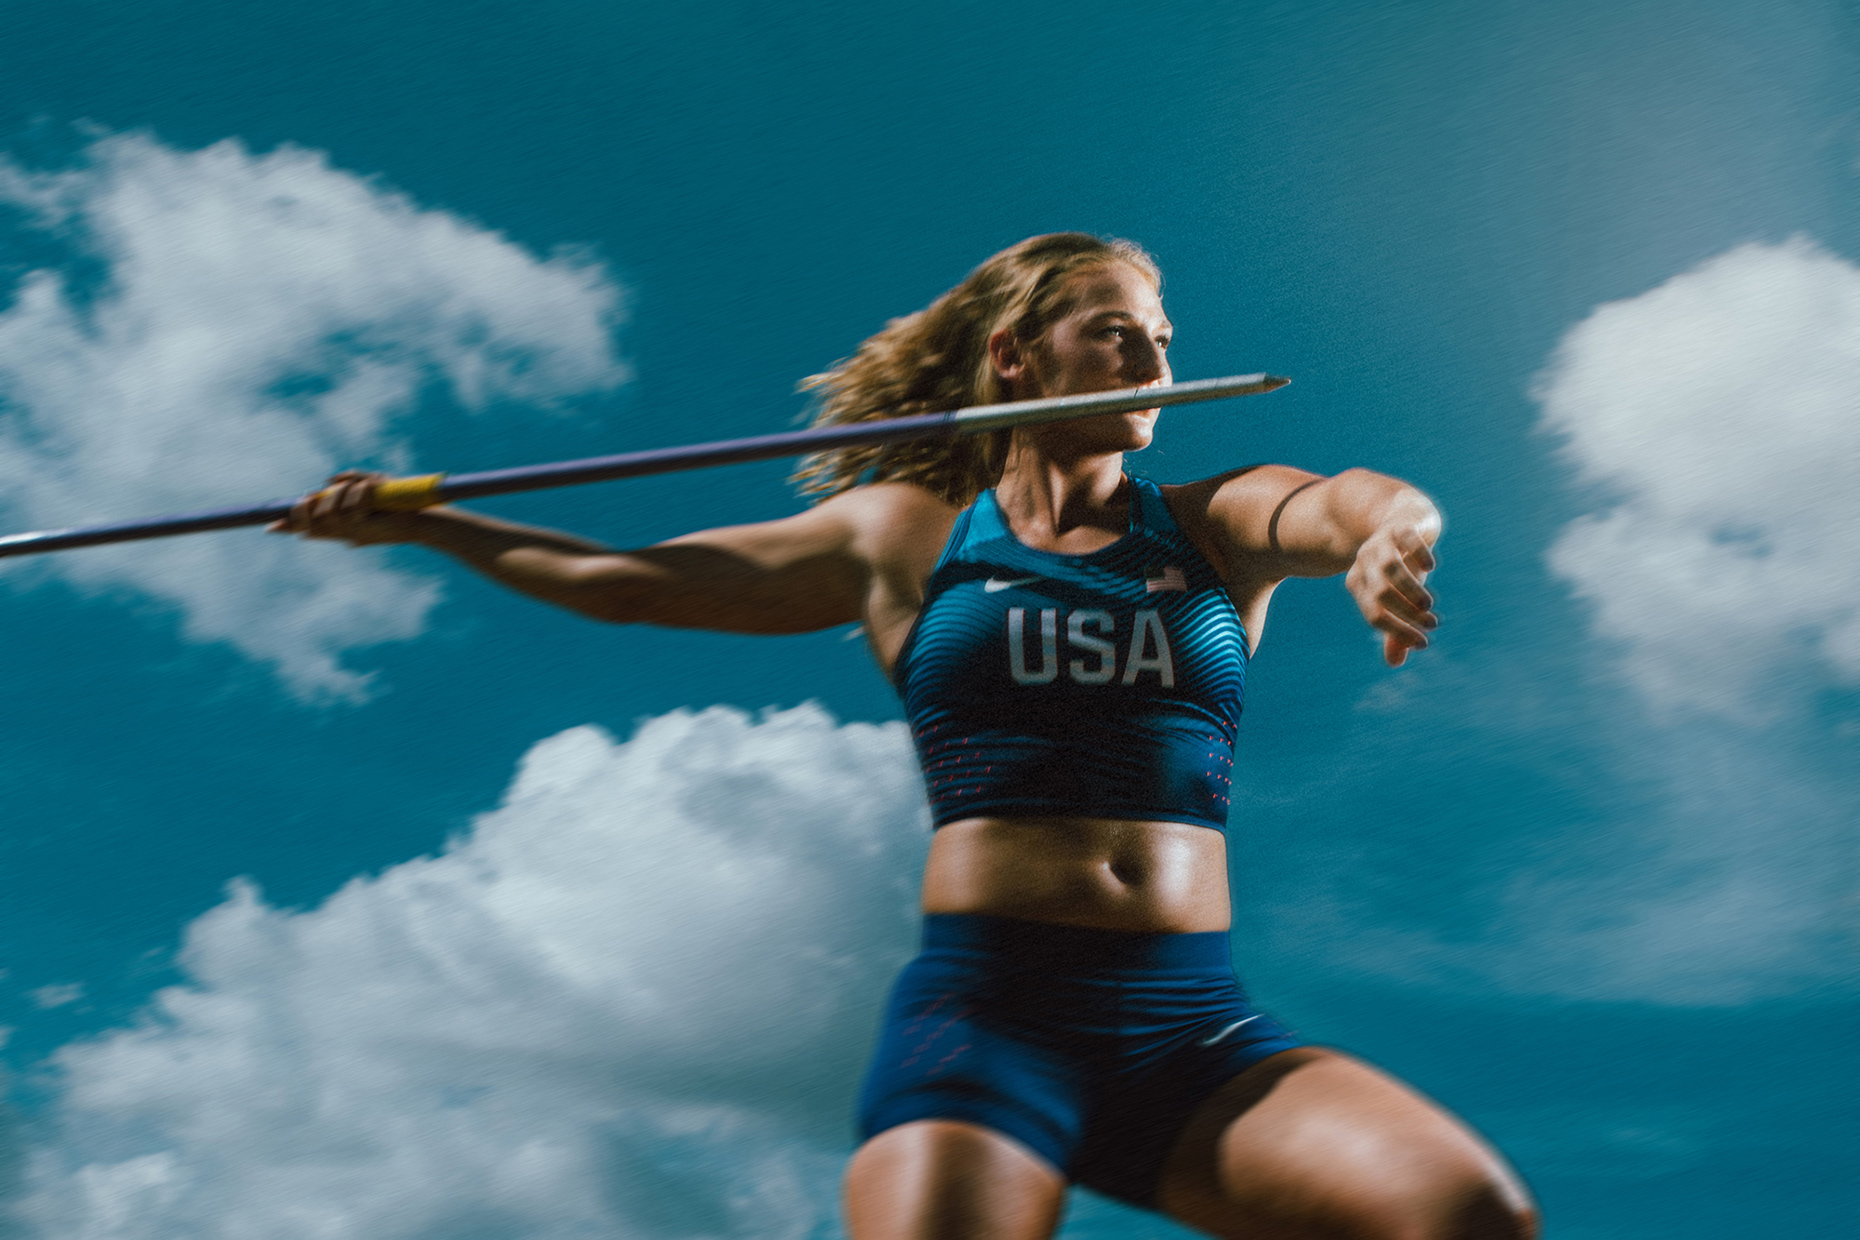 Olympian and Texas A&M Aggie athlete, Maggie Malone, in College Station, Texas photographed by portrait and lifestyle photographer Josh Huskin.